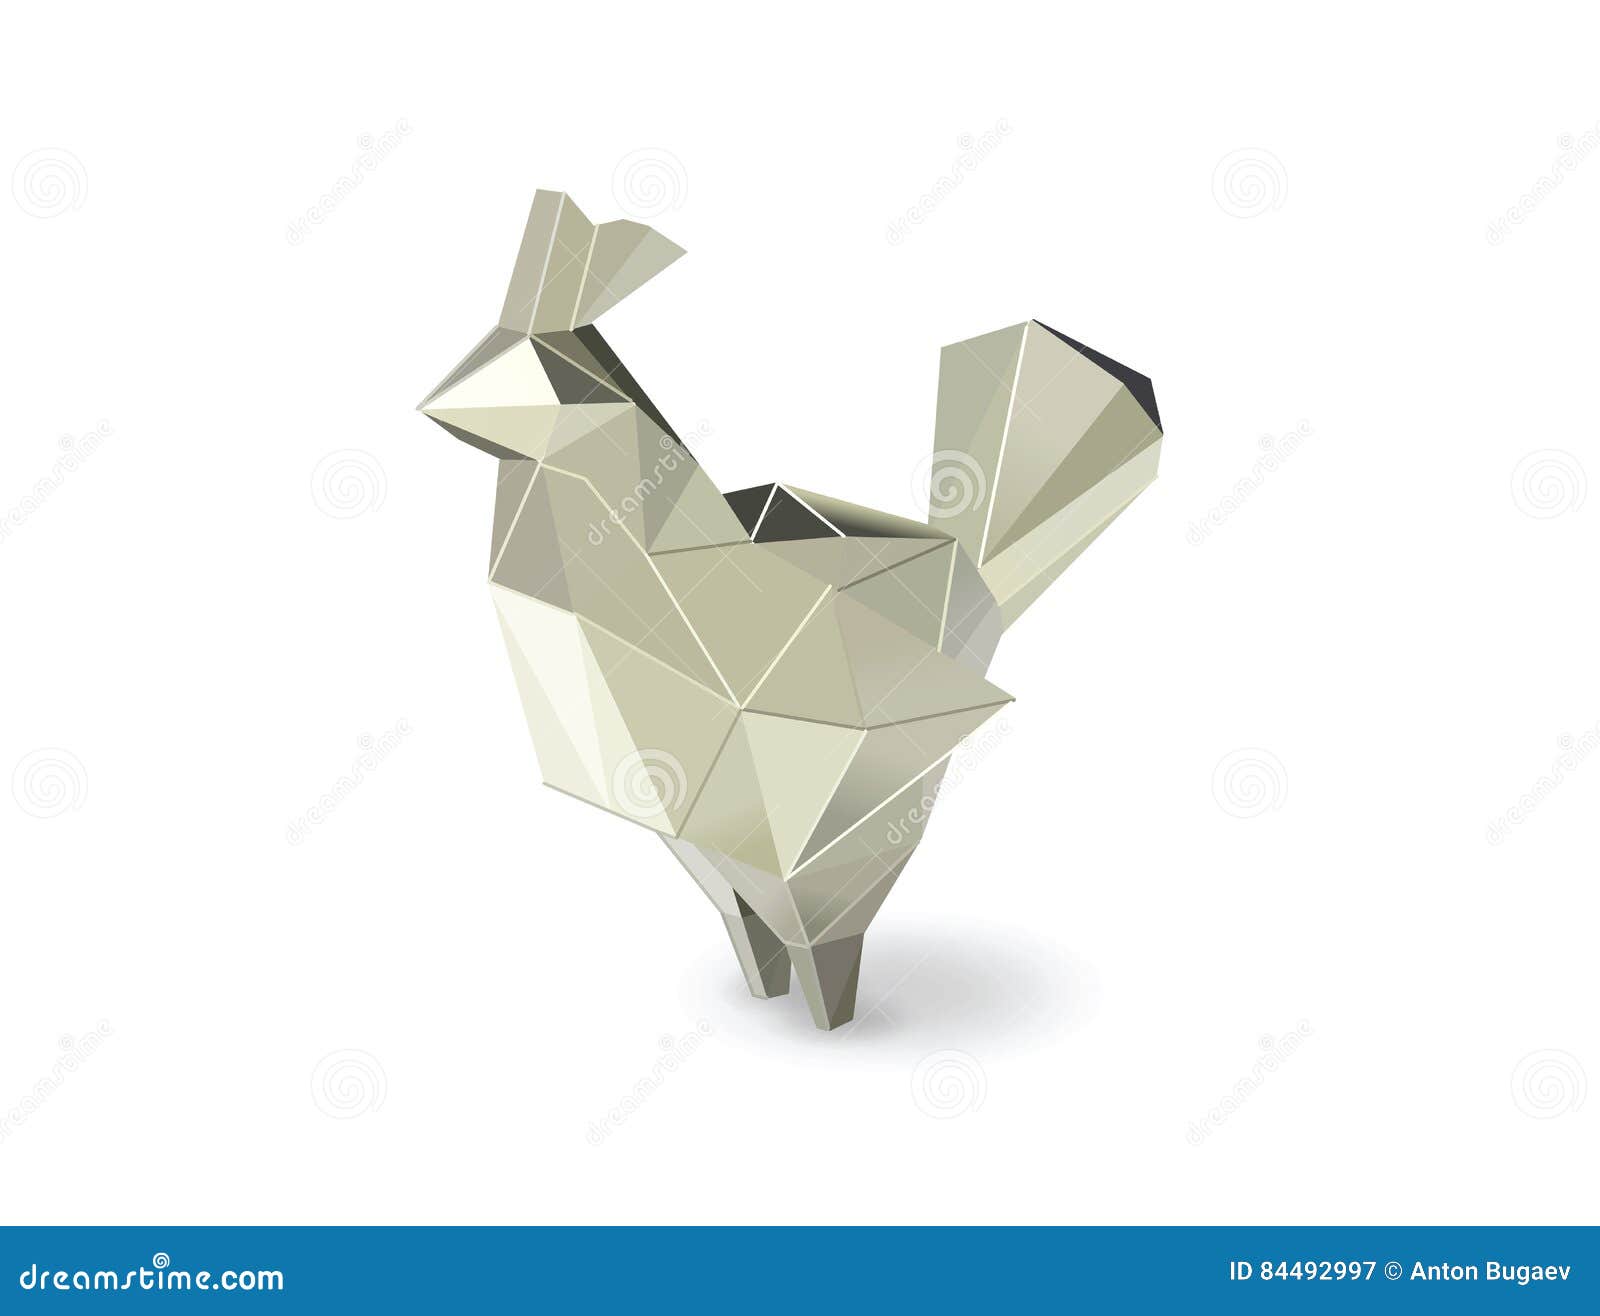 Vector Illustration of Polygonal Silver Rooster Figure, Low Poly Animal  Stock Vector - Illustration of poly, paper: 84492997